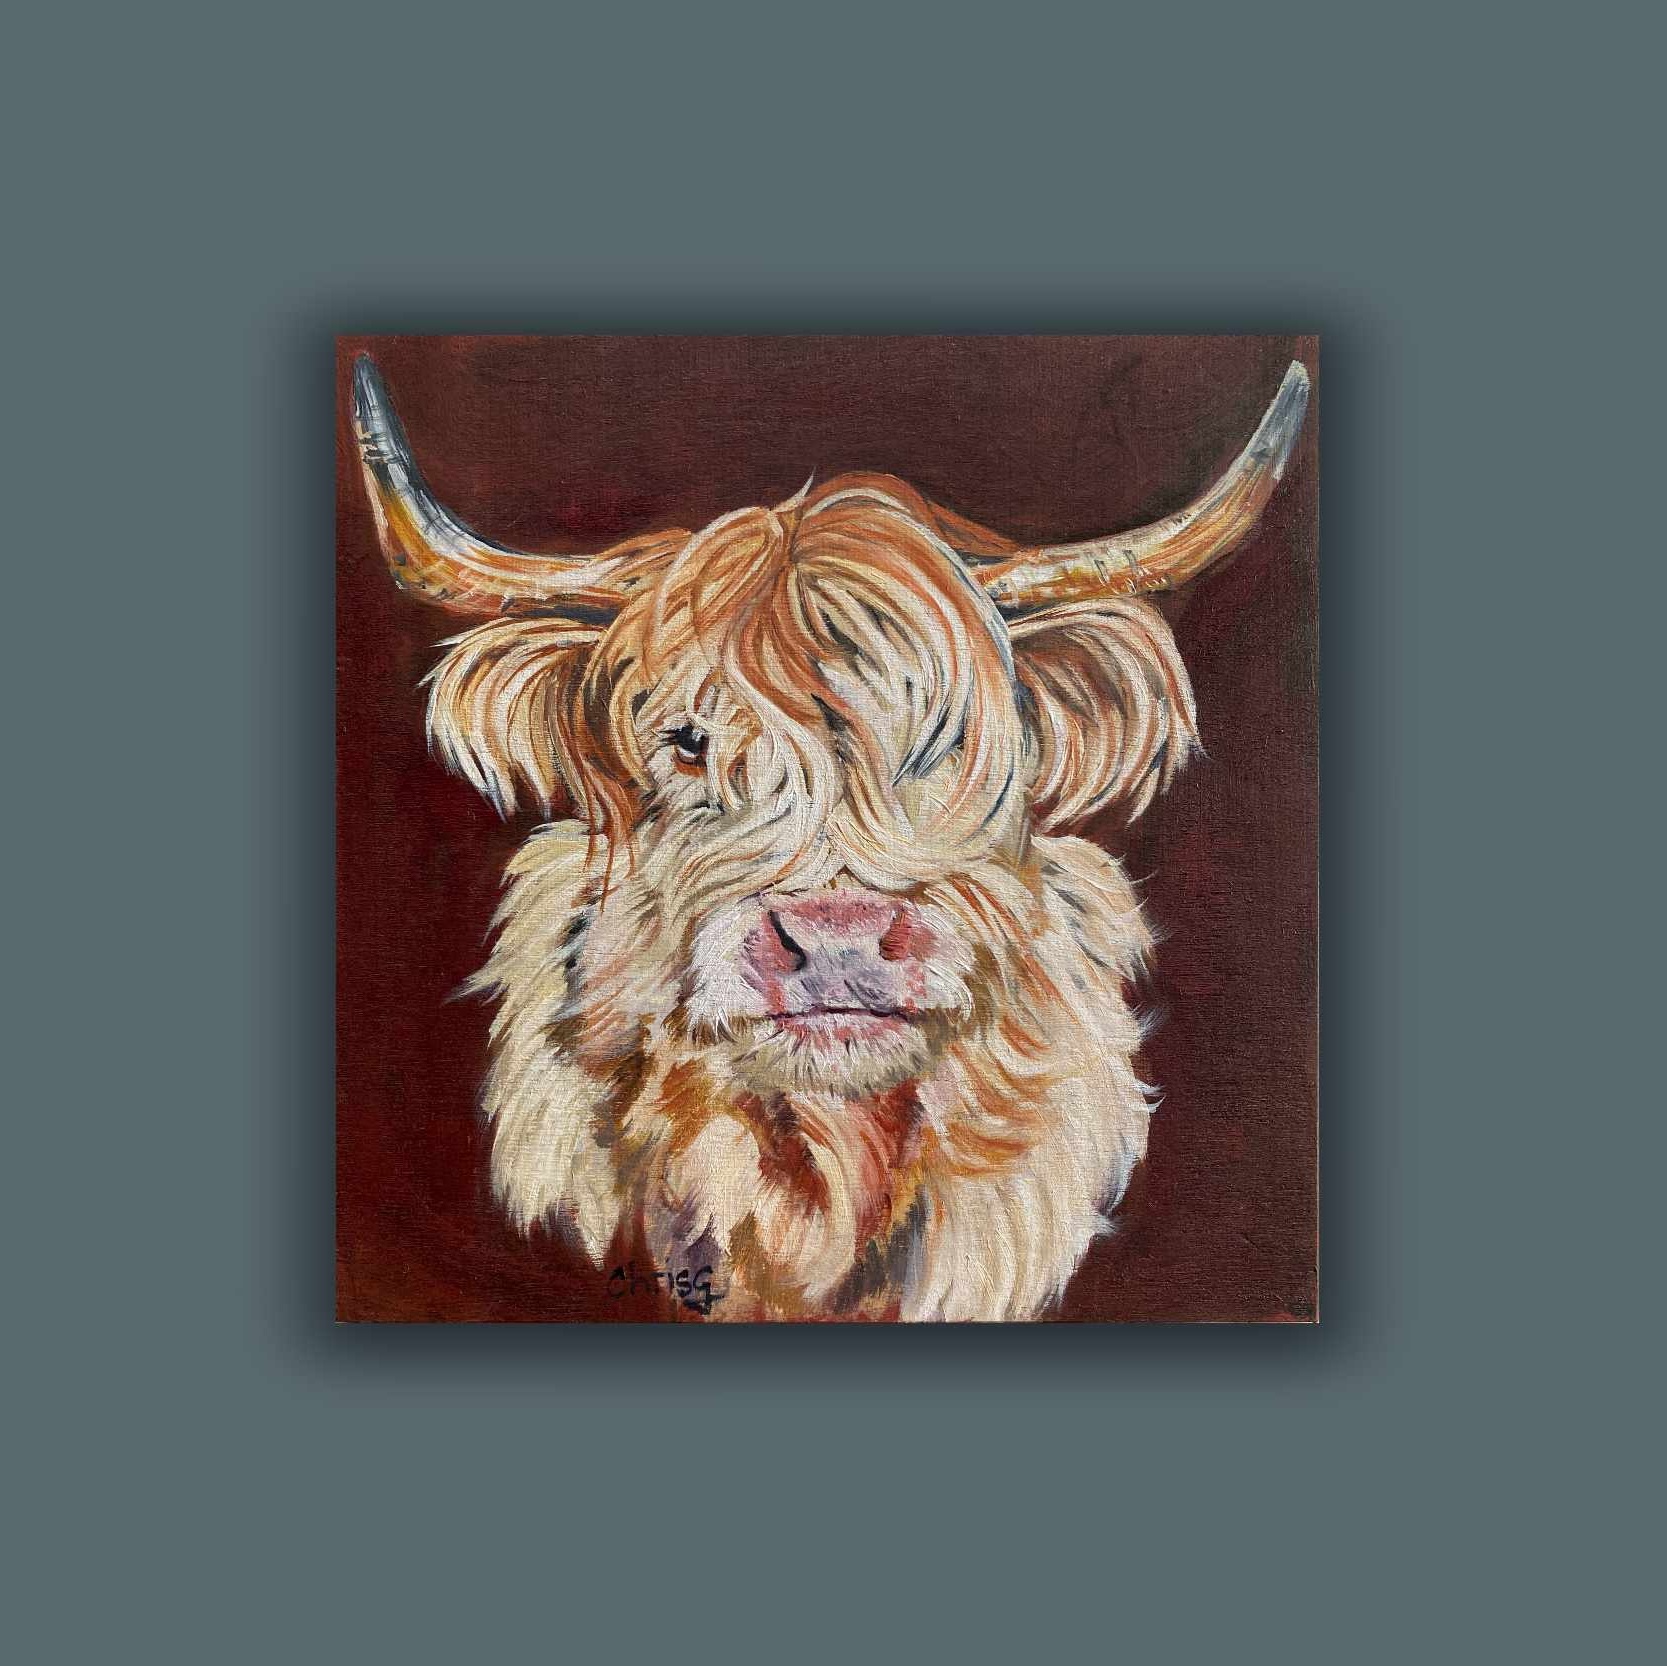 Unmounted print of highland cow Rosie